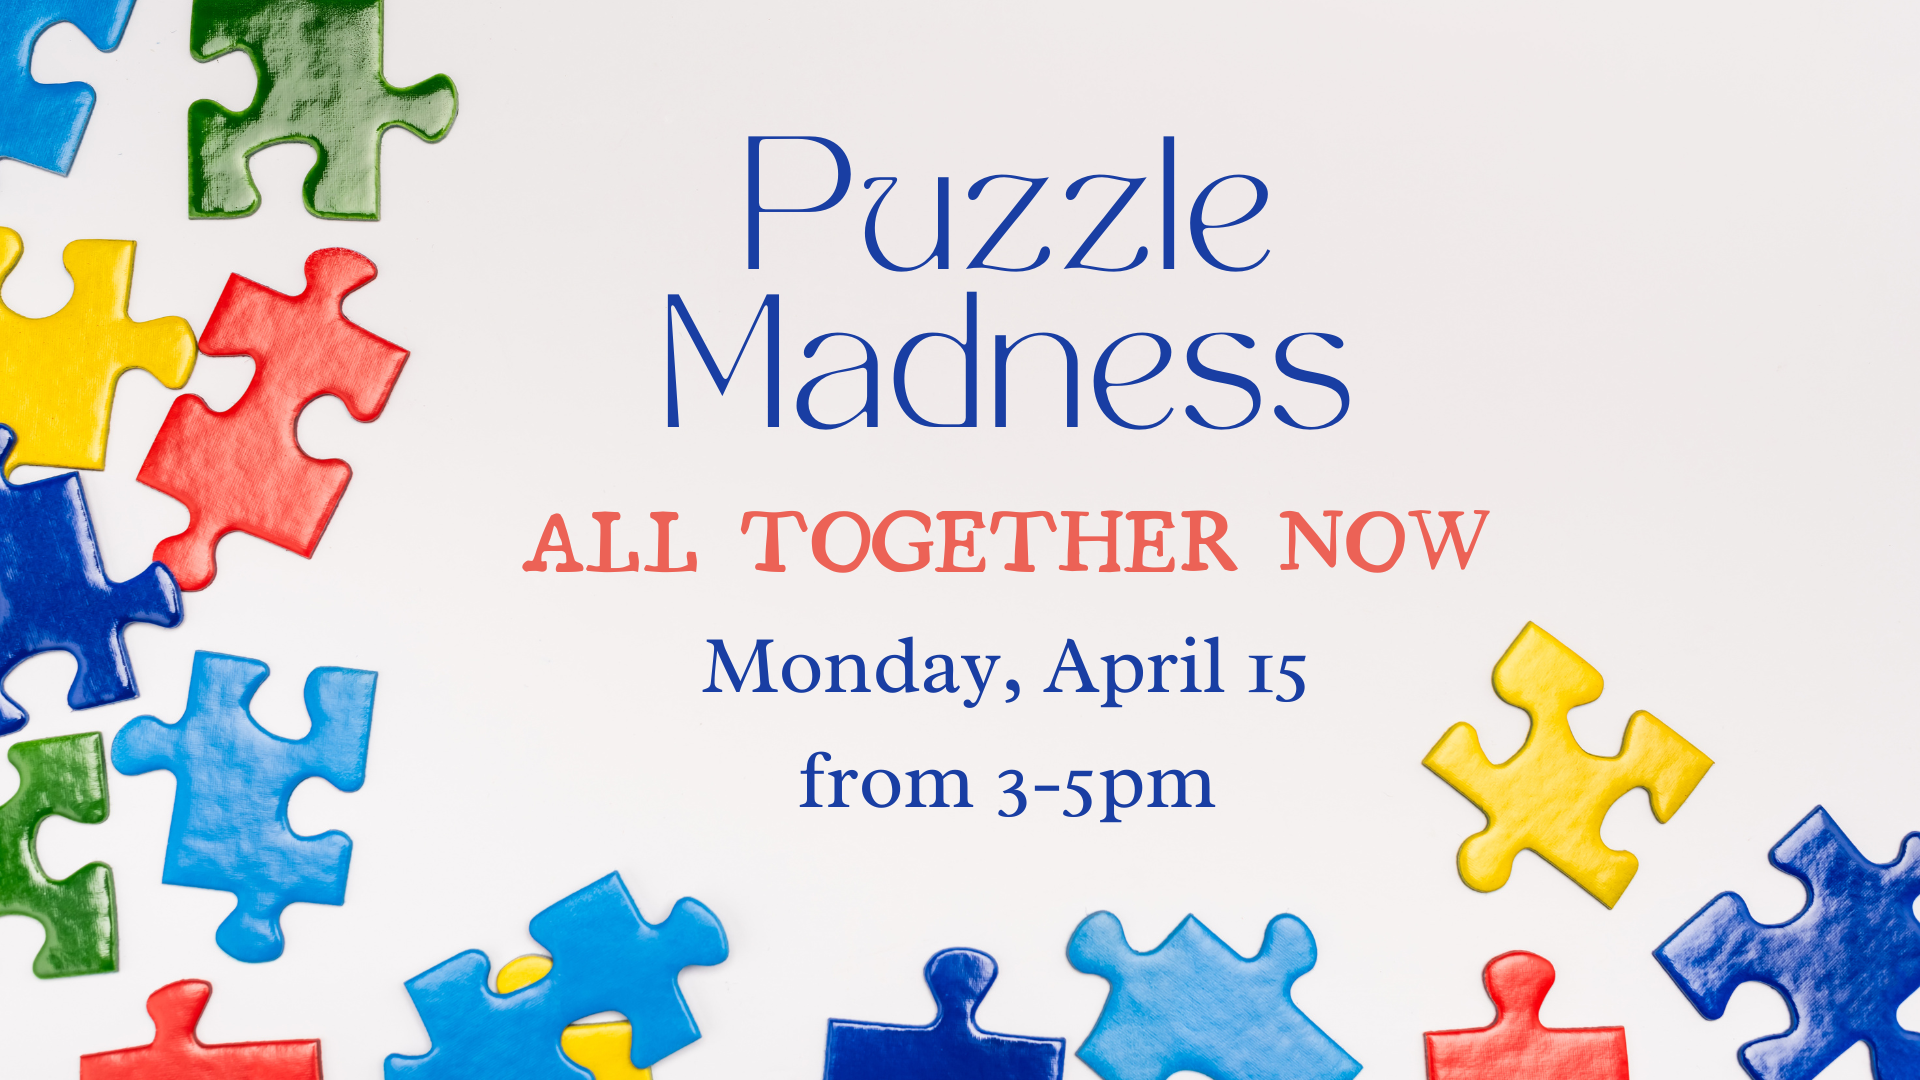 All Together Now: Puzzle Madness